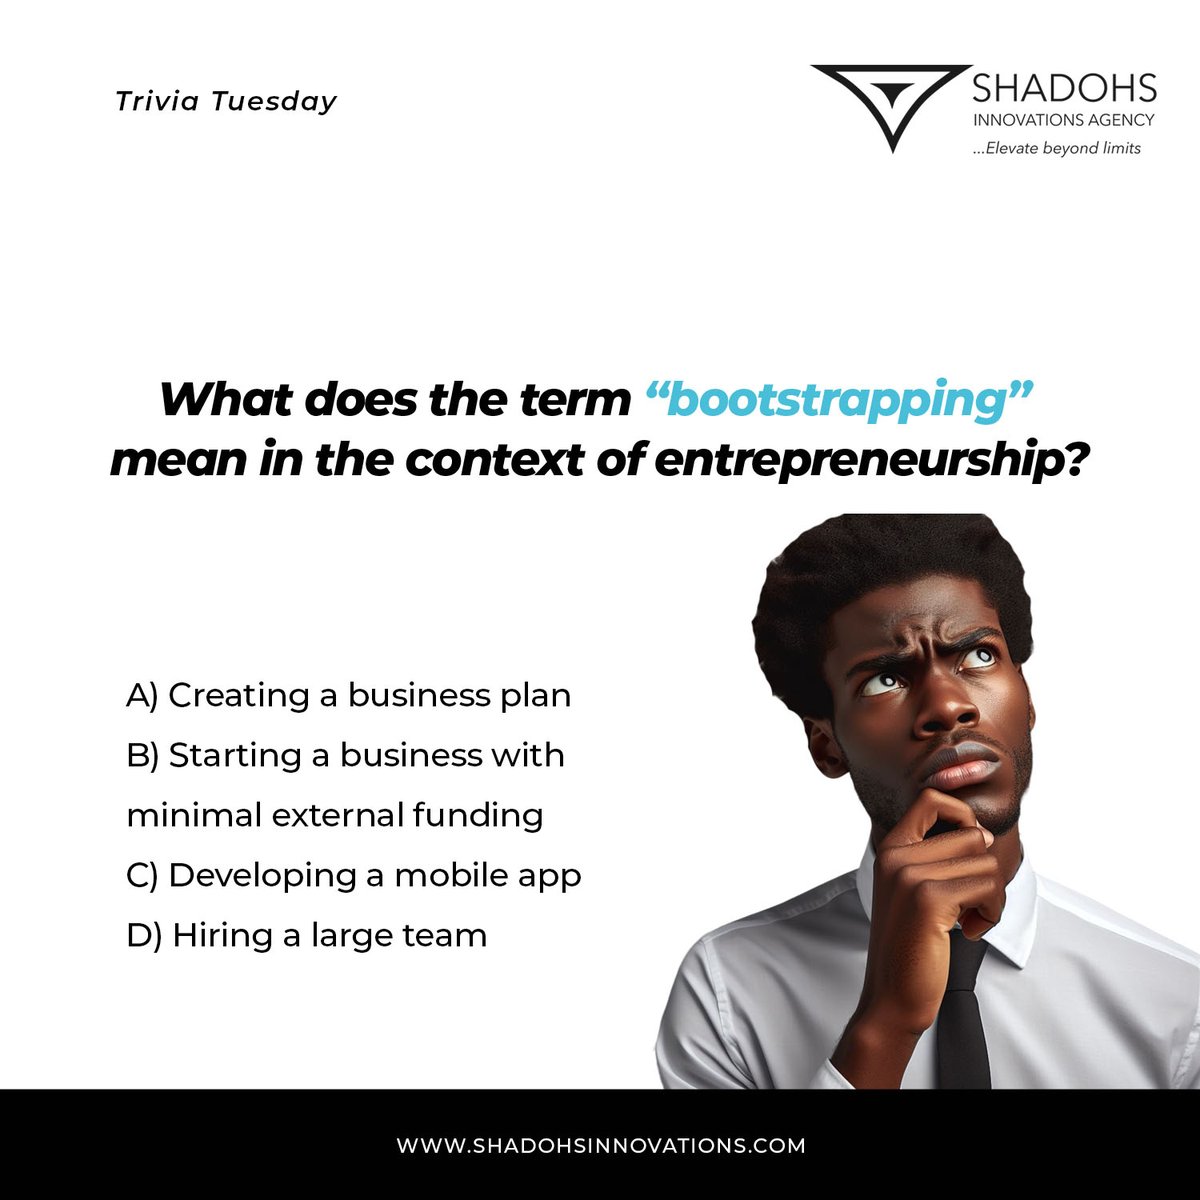 Which do you think is the correct answer?
#tuesdaytrivia 
#ShadohsInnovationsAgencyLtd 
#CreativeAgencyInAbuja 
#innovation

Comment below